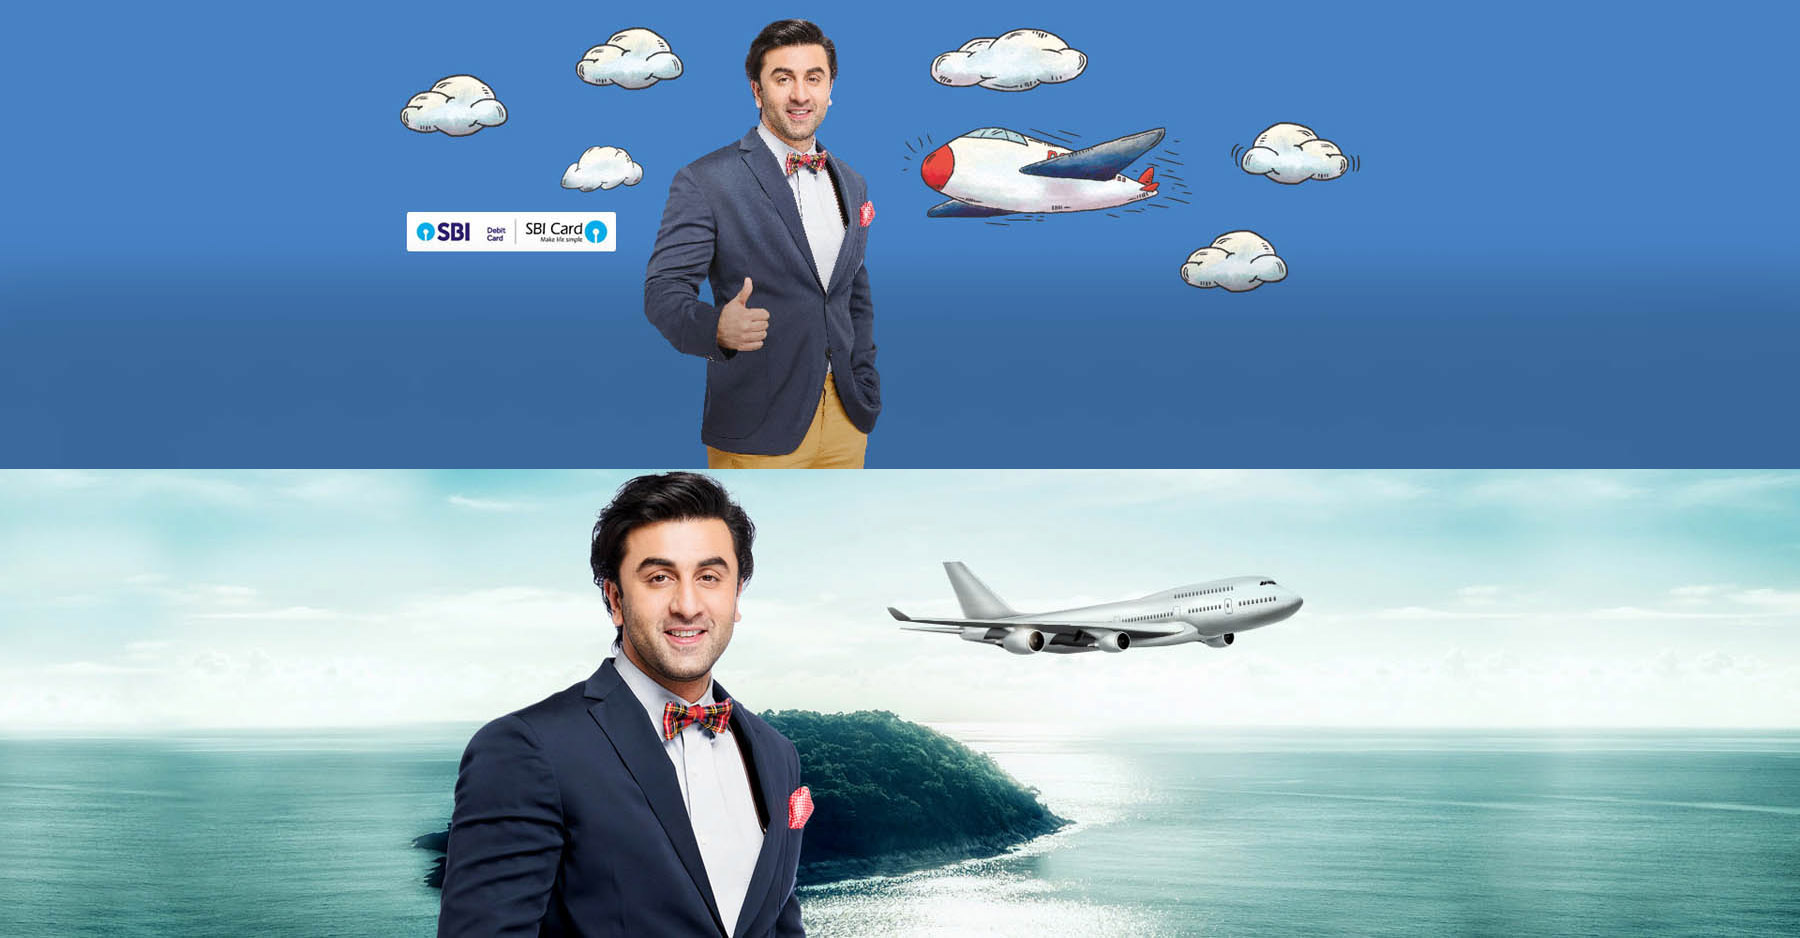 Best Advertising Photographer in India Vikram Bawa, Actor Ranbir Kapoor for Yatra, shoot with star, Airlines Legend, Travel shoot, Travel Photographer, Best Fashion Photographer Vikram Bawa, Mumbai, India